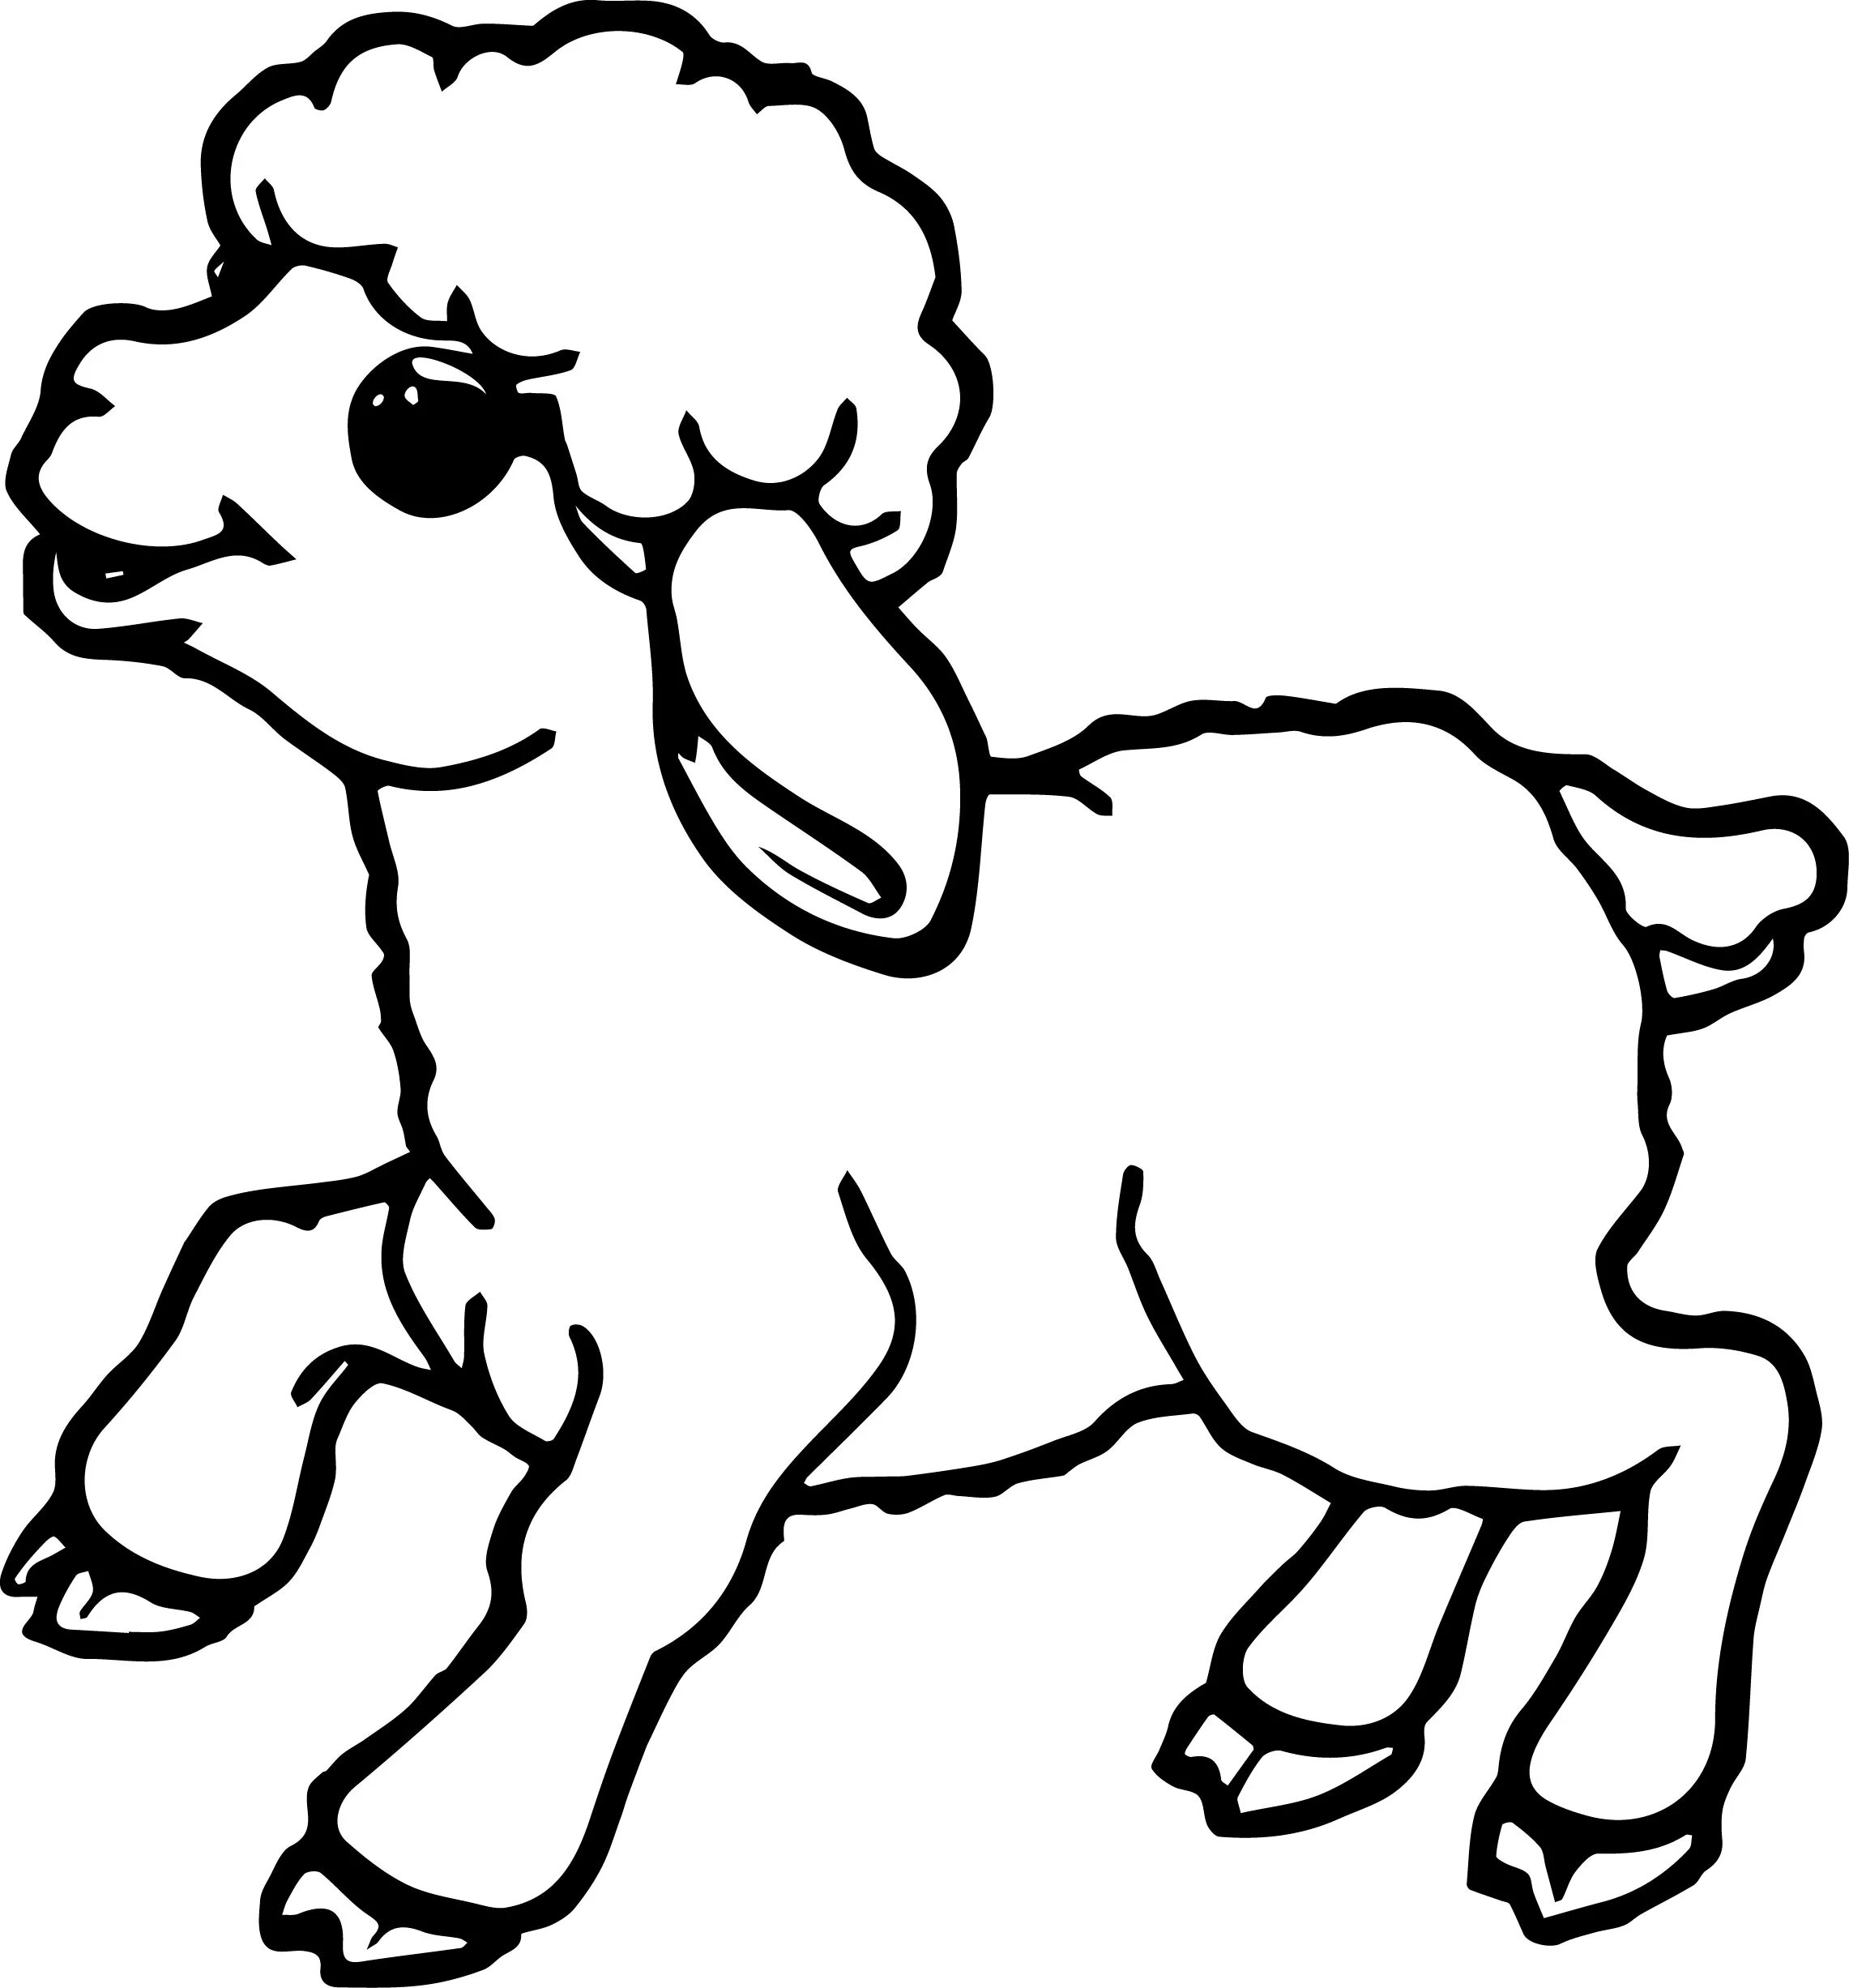 Adorable lamb coloring book for kids